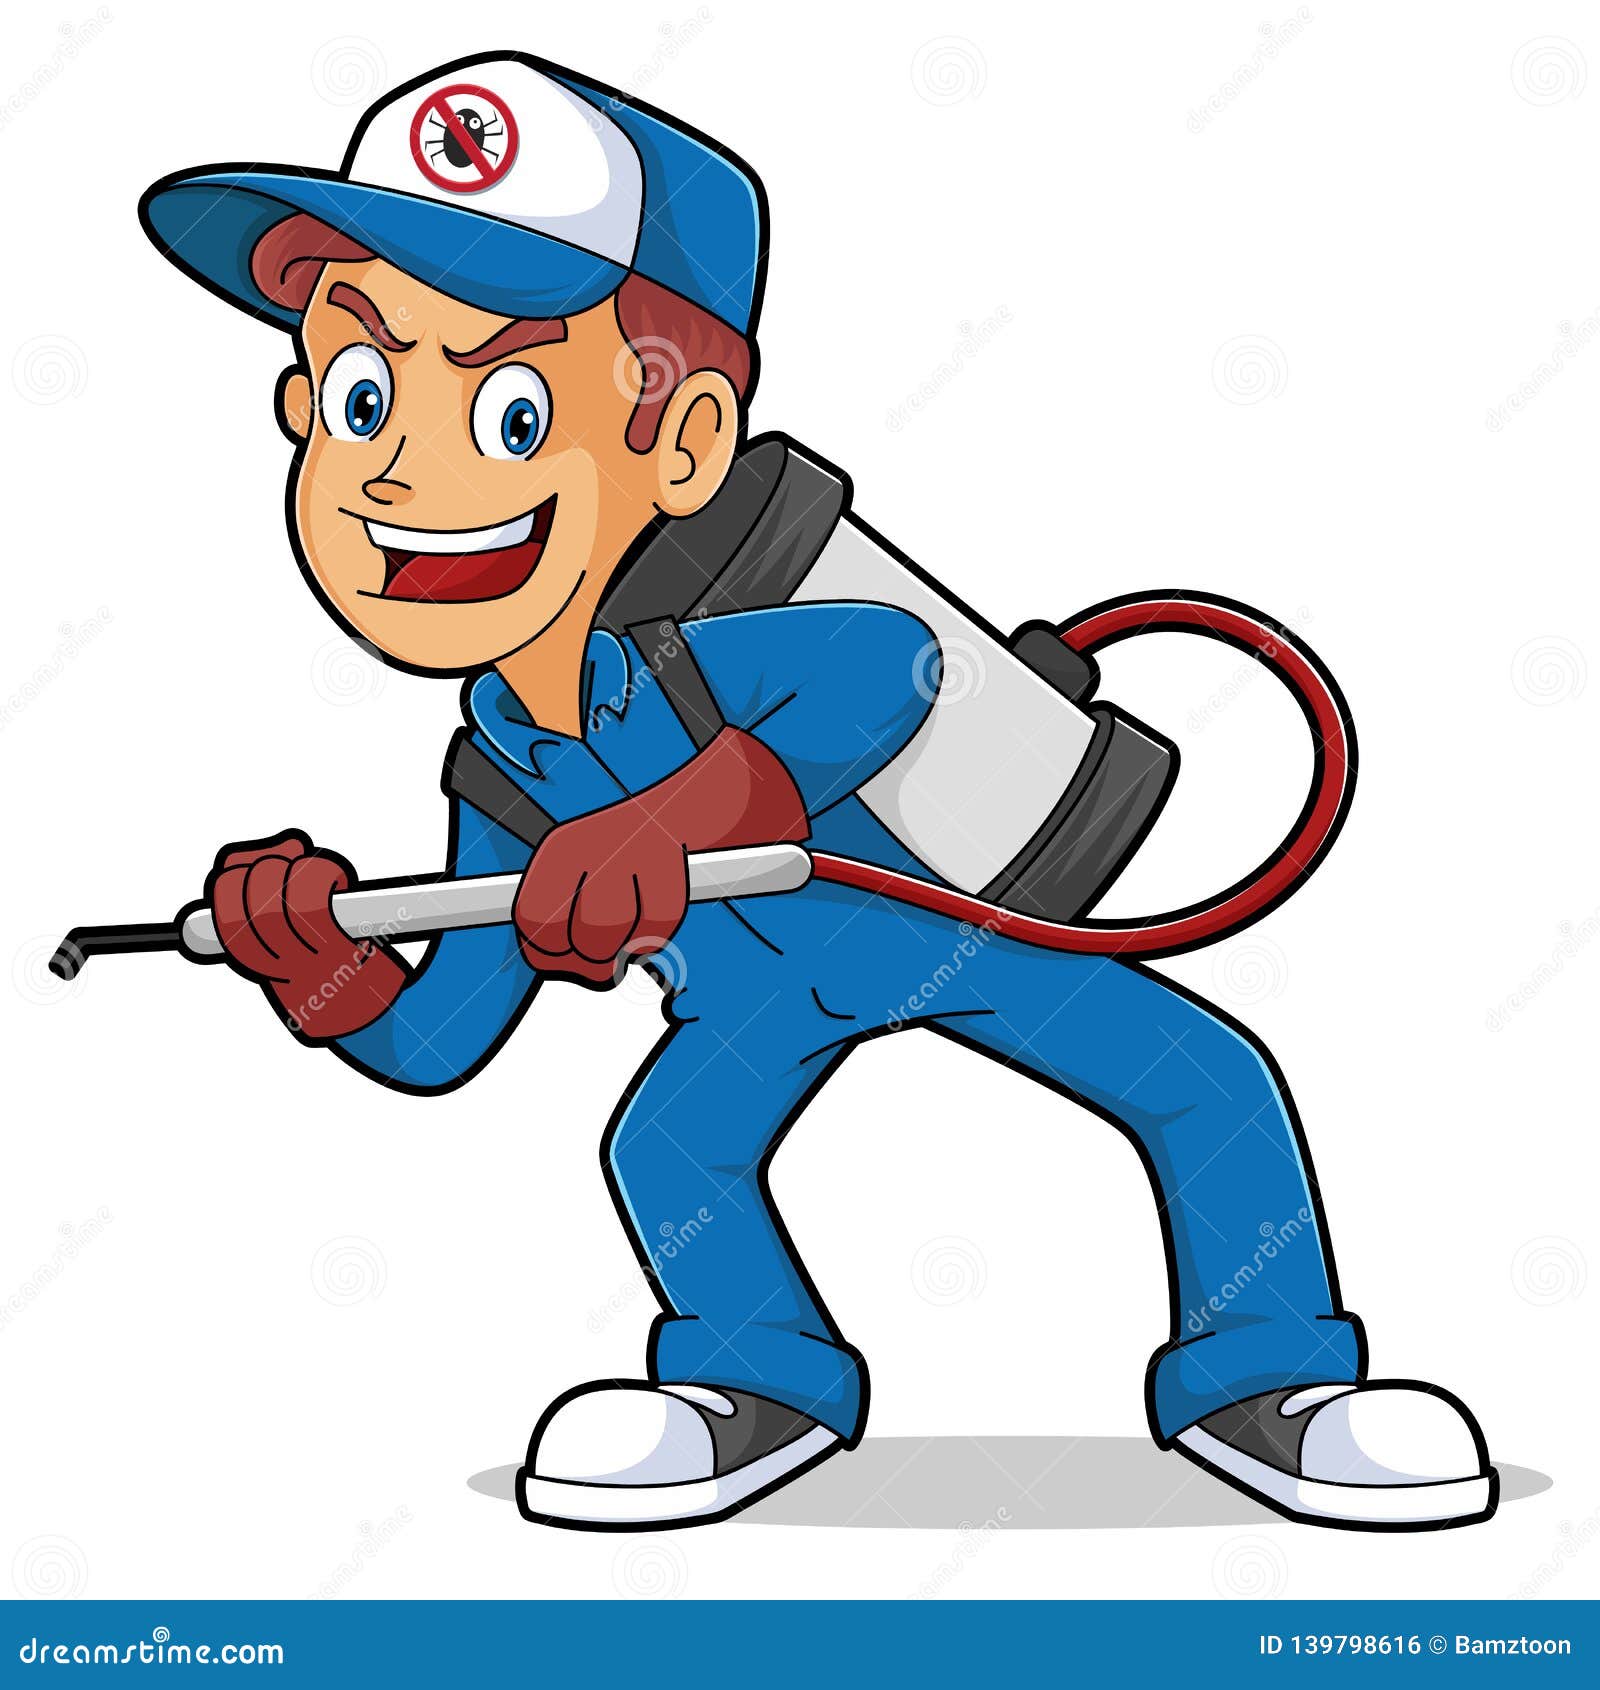 Exterminator or Pest Control Stock Vector - Illustration of insect,  cartoon: 139798616